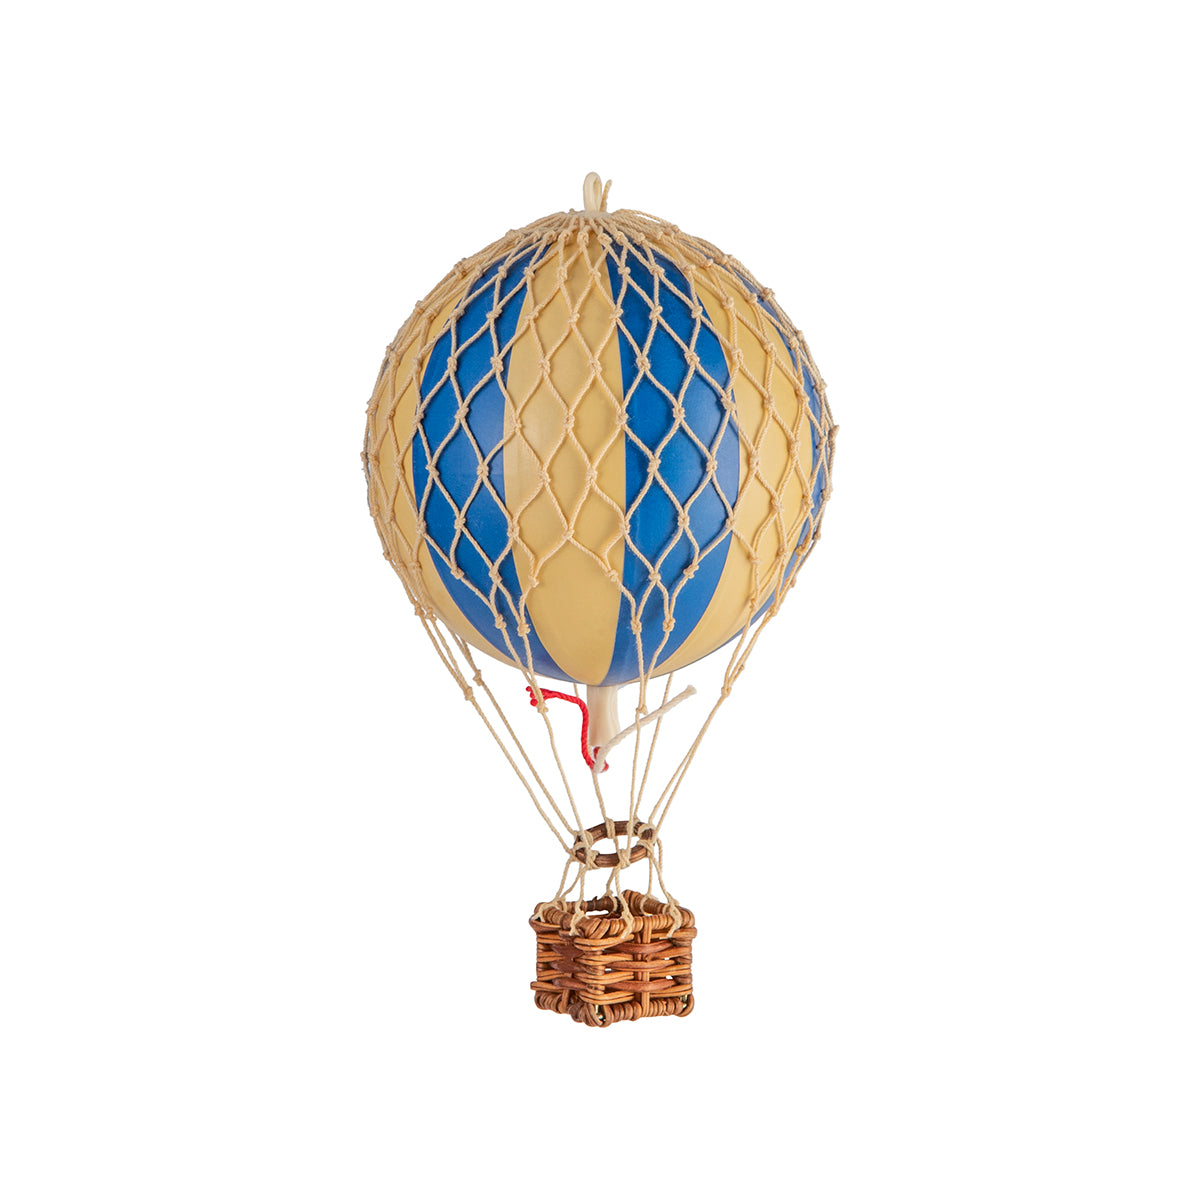 Embark on a Wonderen Extra Small Hot Air Balloon - Floating The Skies adventure as you soar through the sky in a captivating blue and white wicker basket, brought to you by Wonderen Stroopwafels.